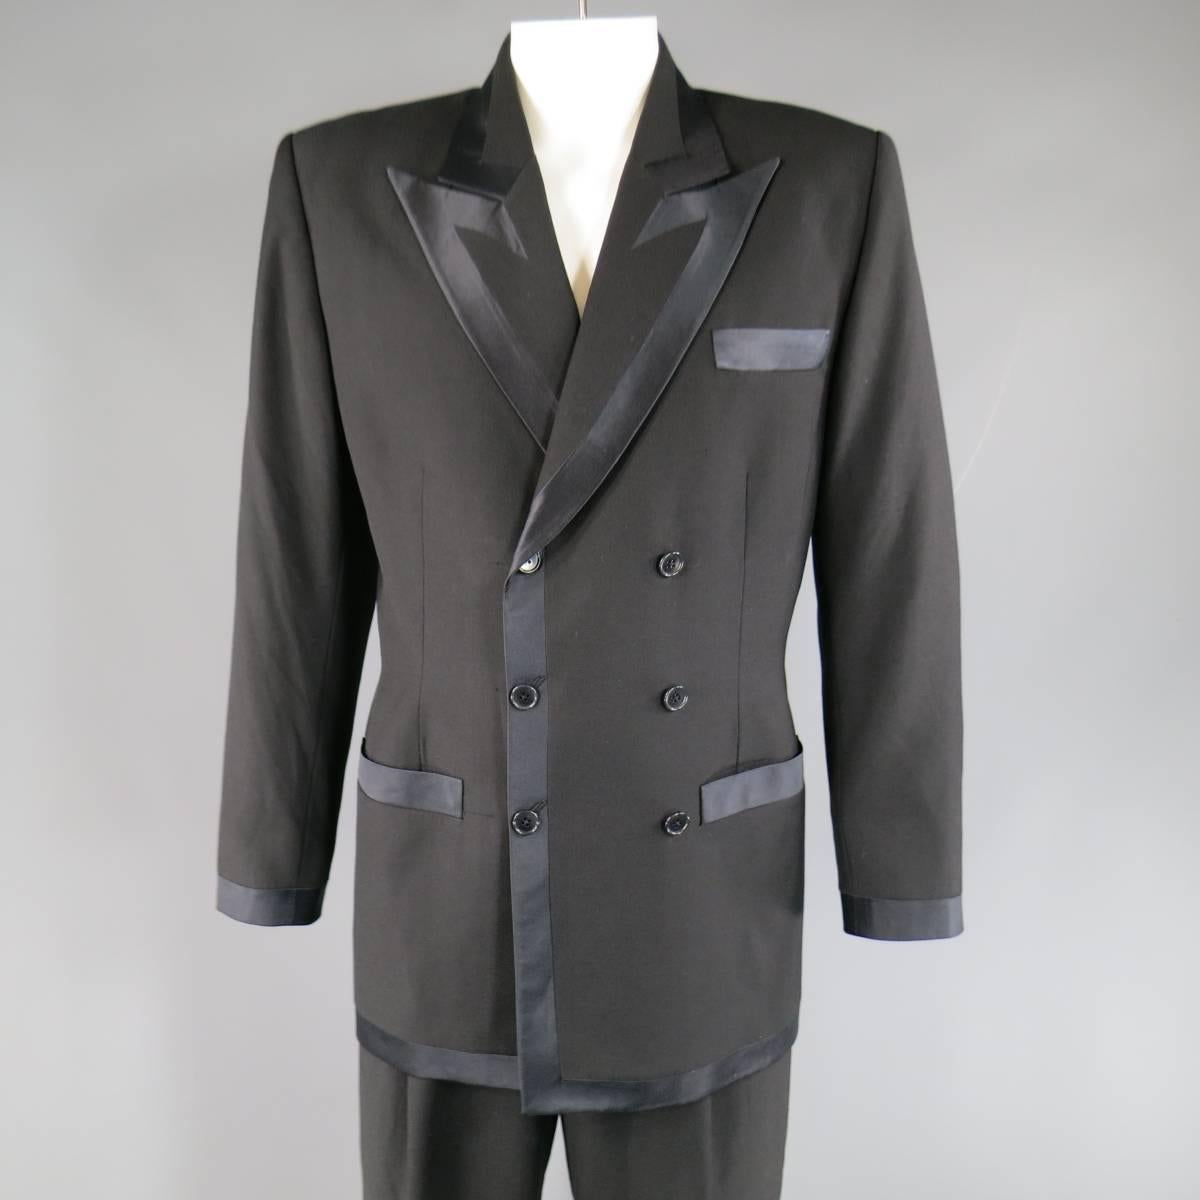 Vintage RICHARD TYLER tuxedo suit comes in a black wool fabric and includes a double breasted, peak lapel, silk lined sport coat with thick satin piping and matching high wasted, single pleat trousers with skinny satin piping stripe.Made in USA.
